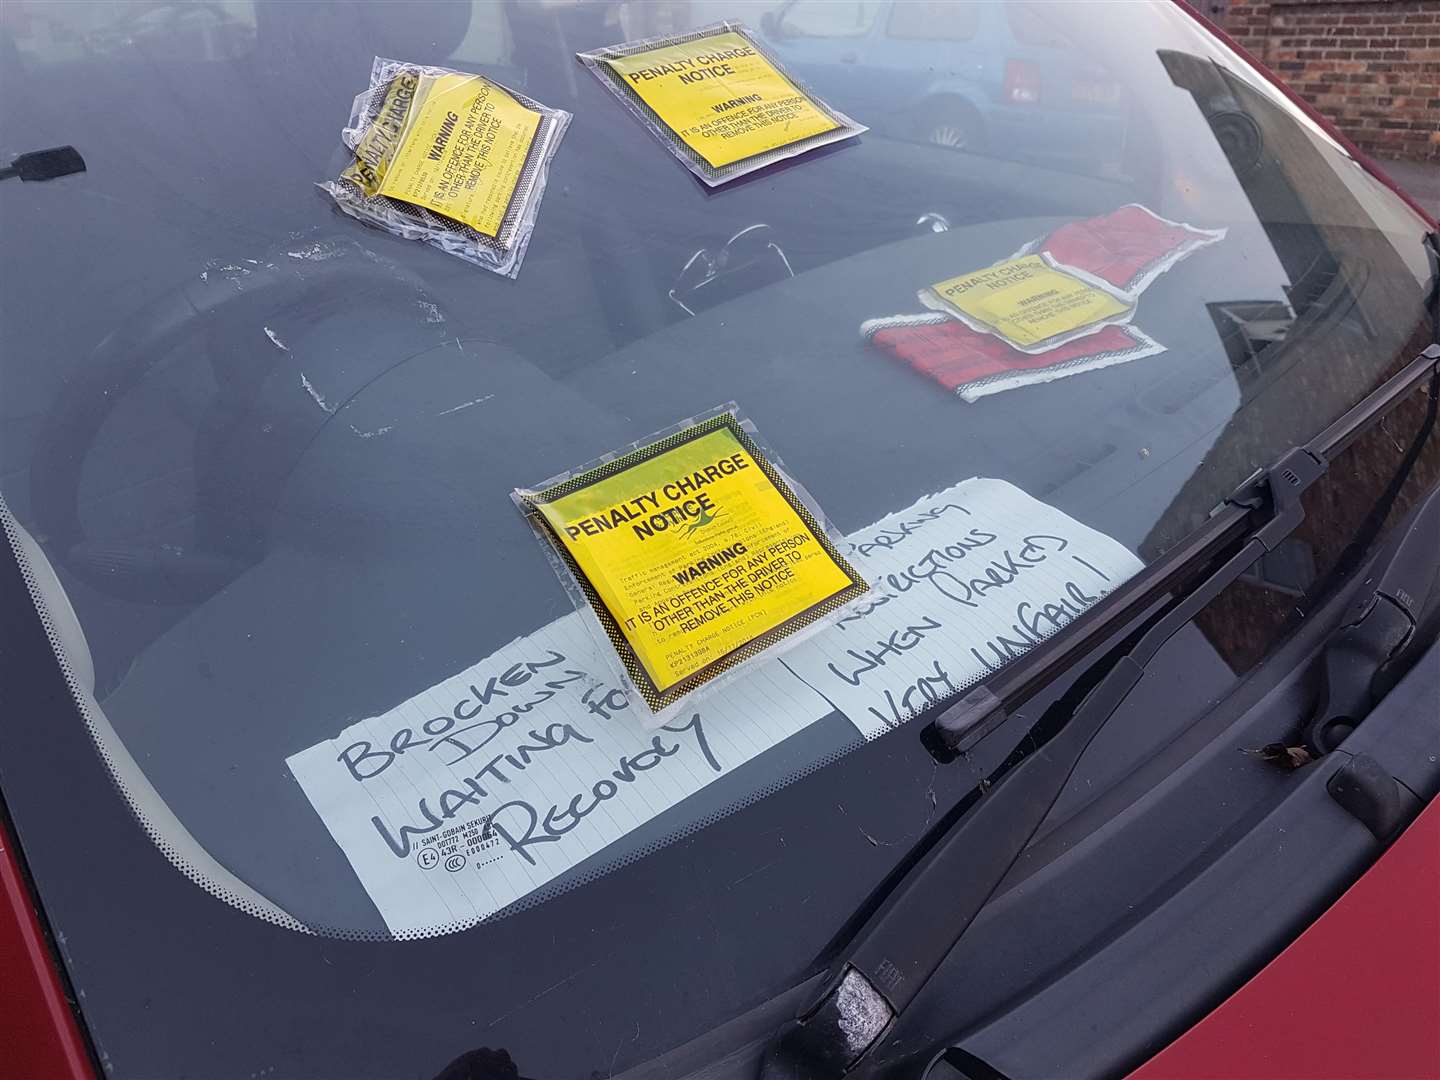 The driver has left notes on her dashboard